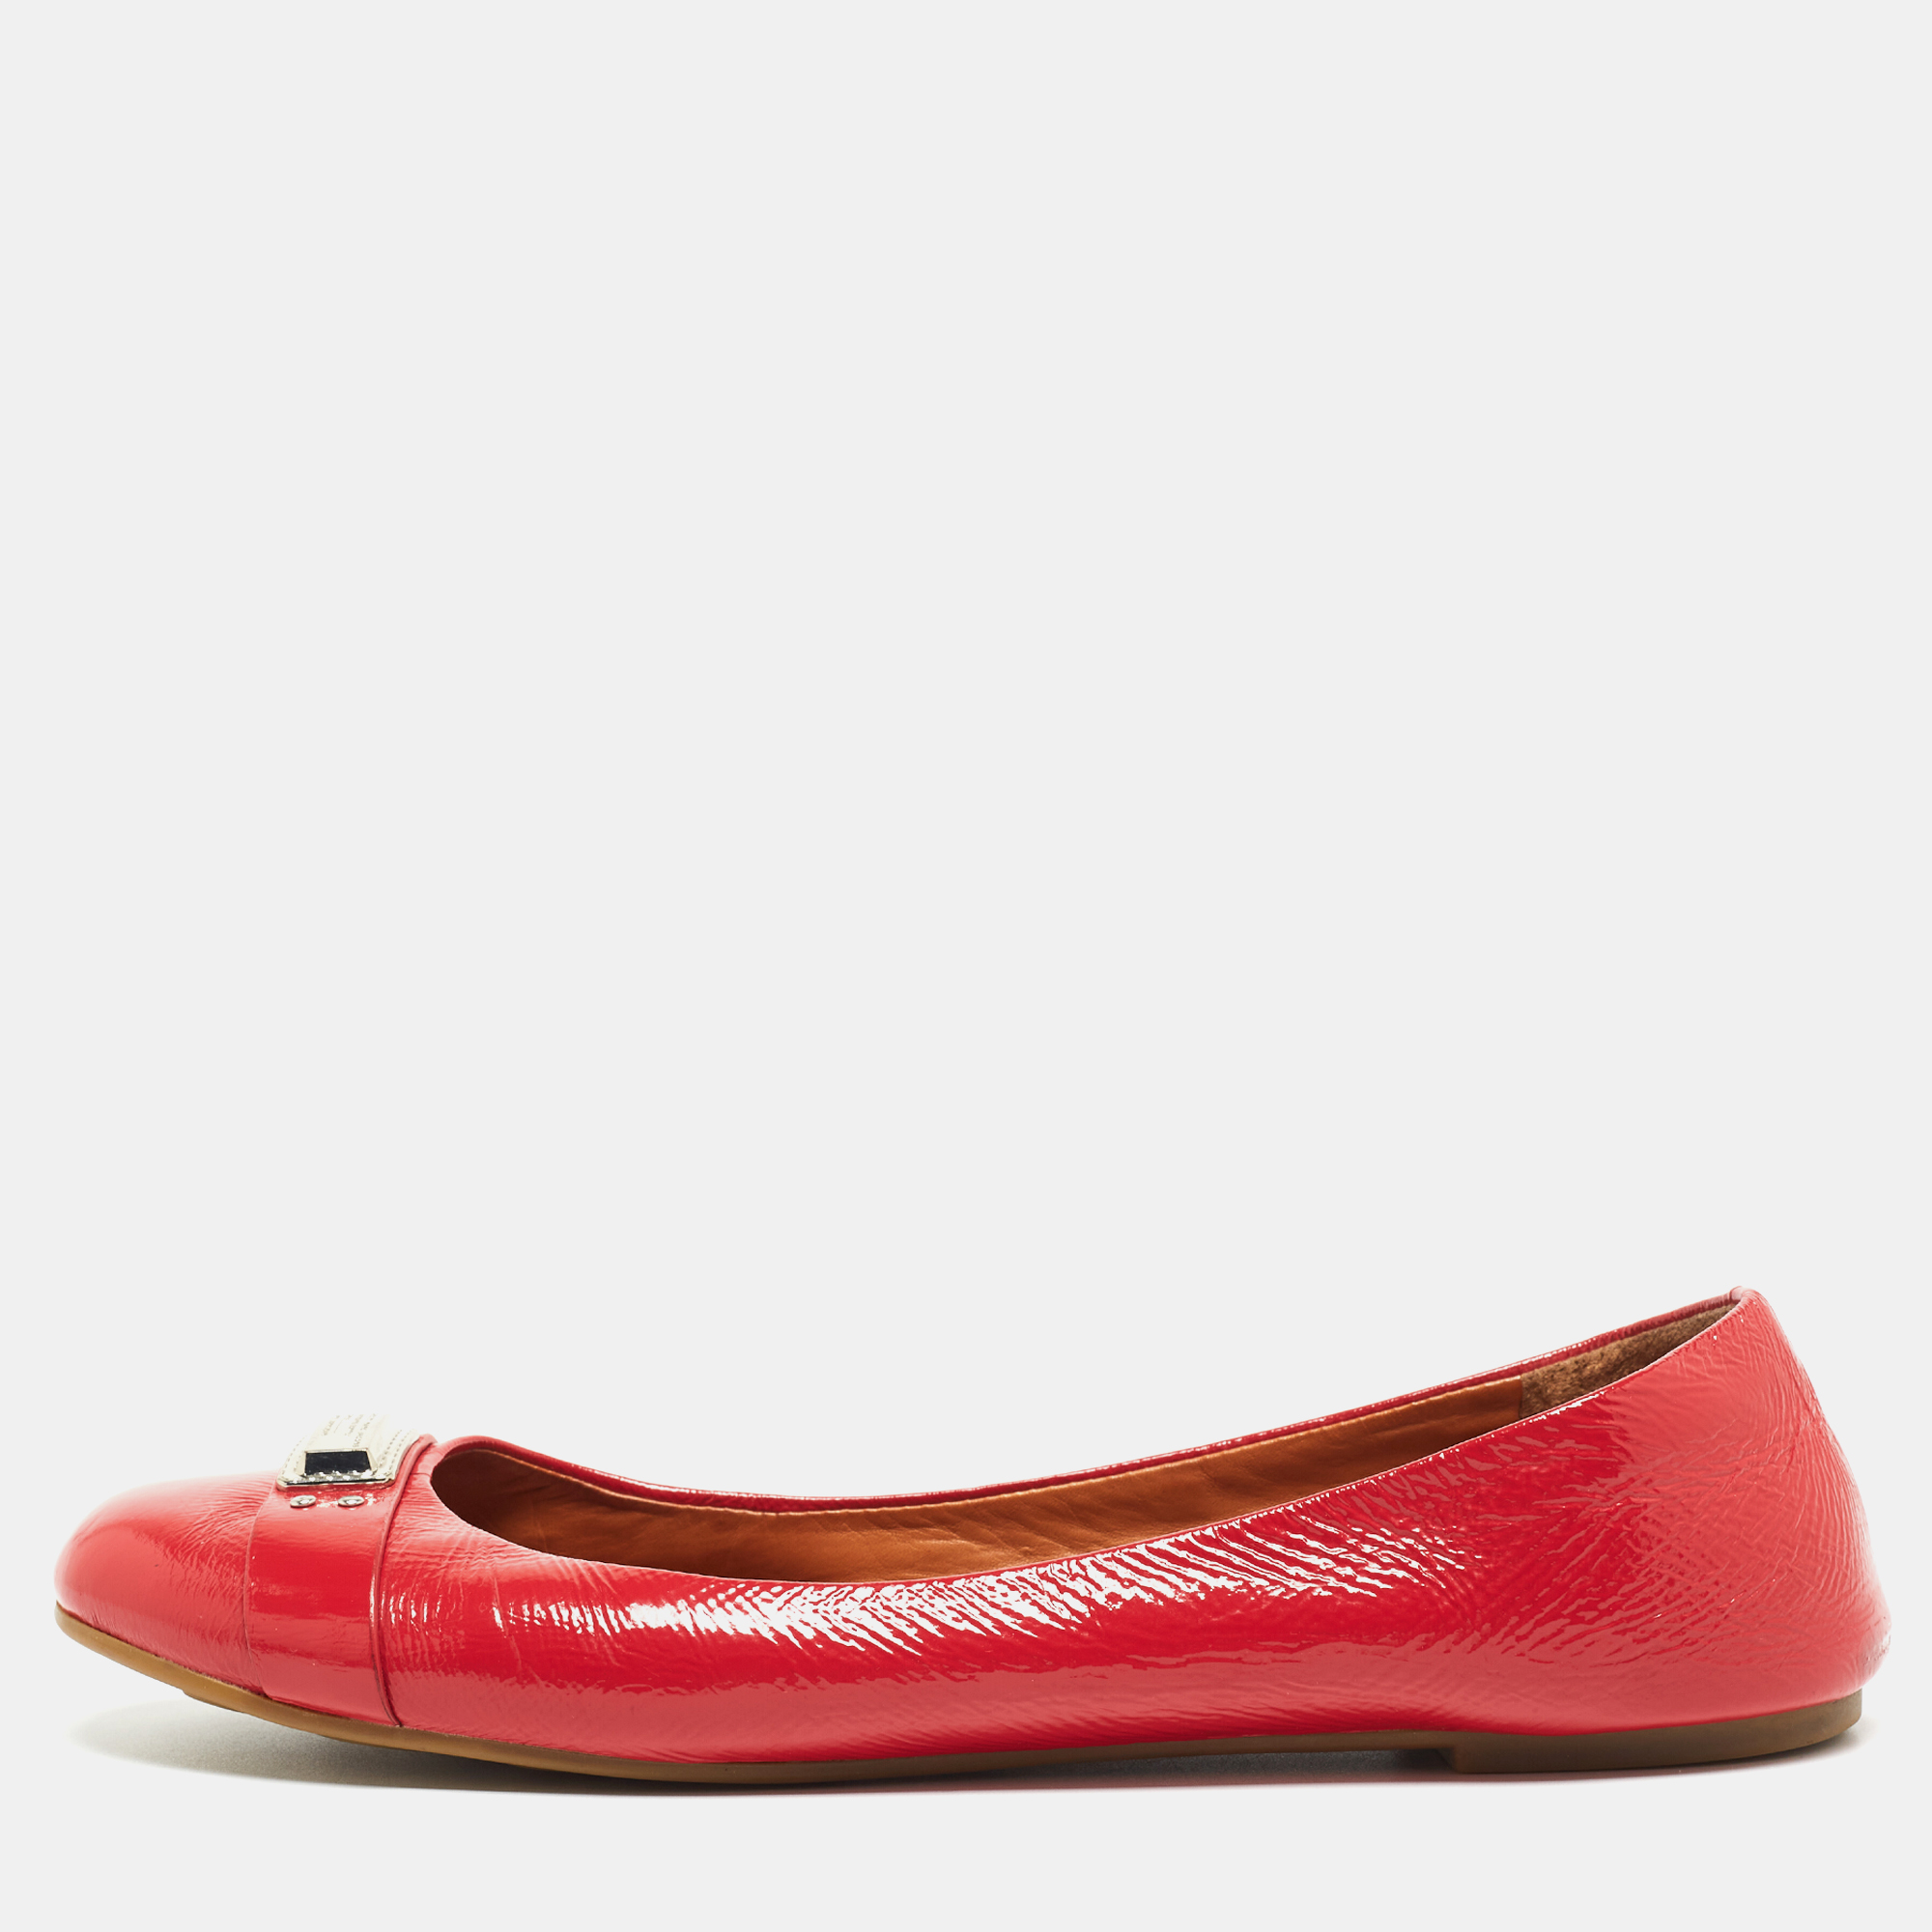 

Marc by Marc Jacobs Red Patent Leather Ballet Flats Size